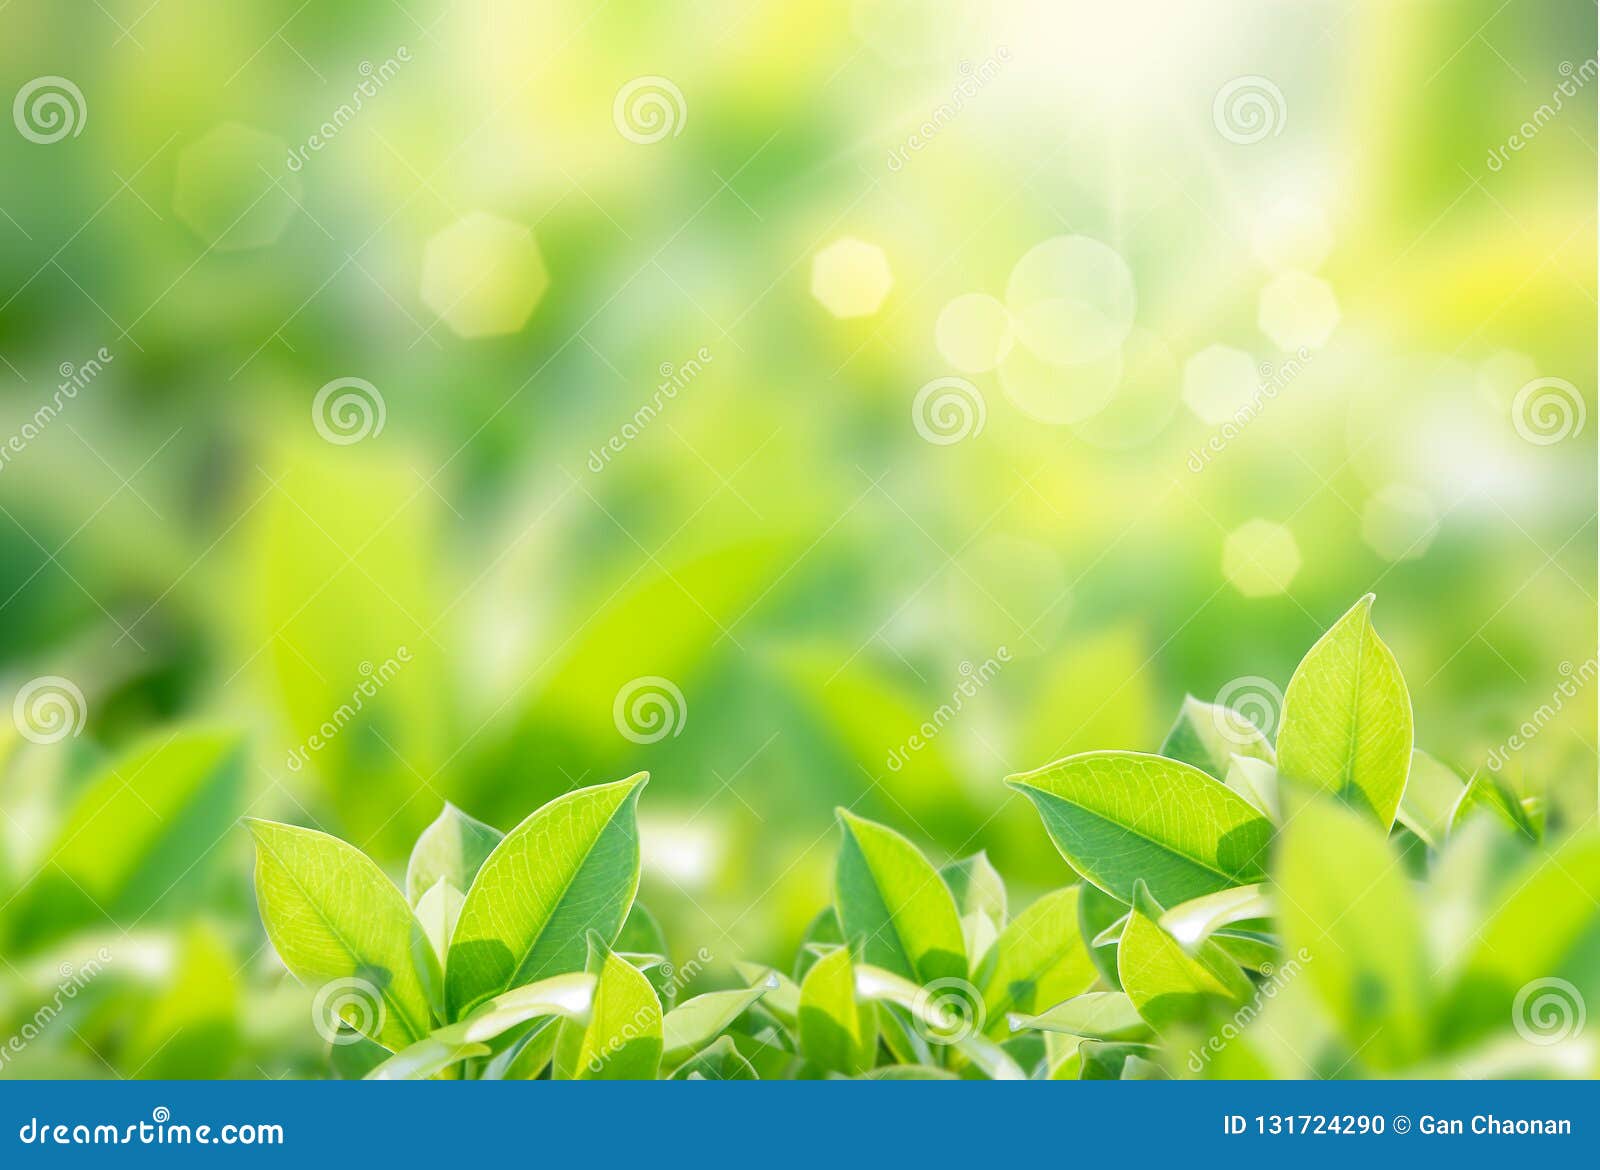 closeup nature view of green leaf on blurred greenery background in garden with copy space using as background